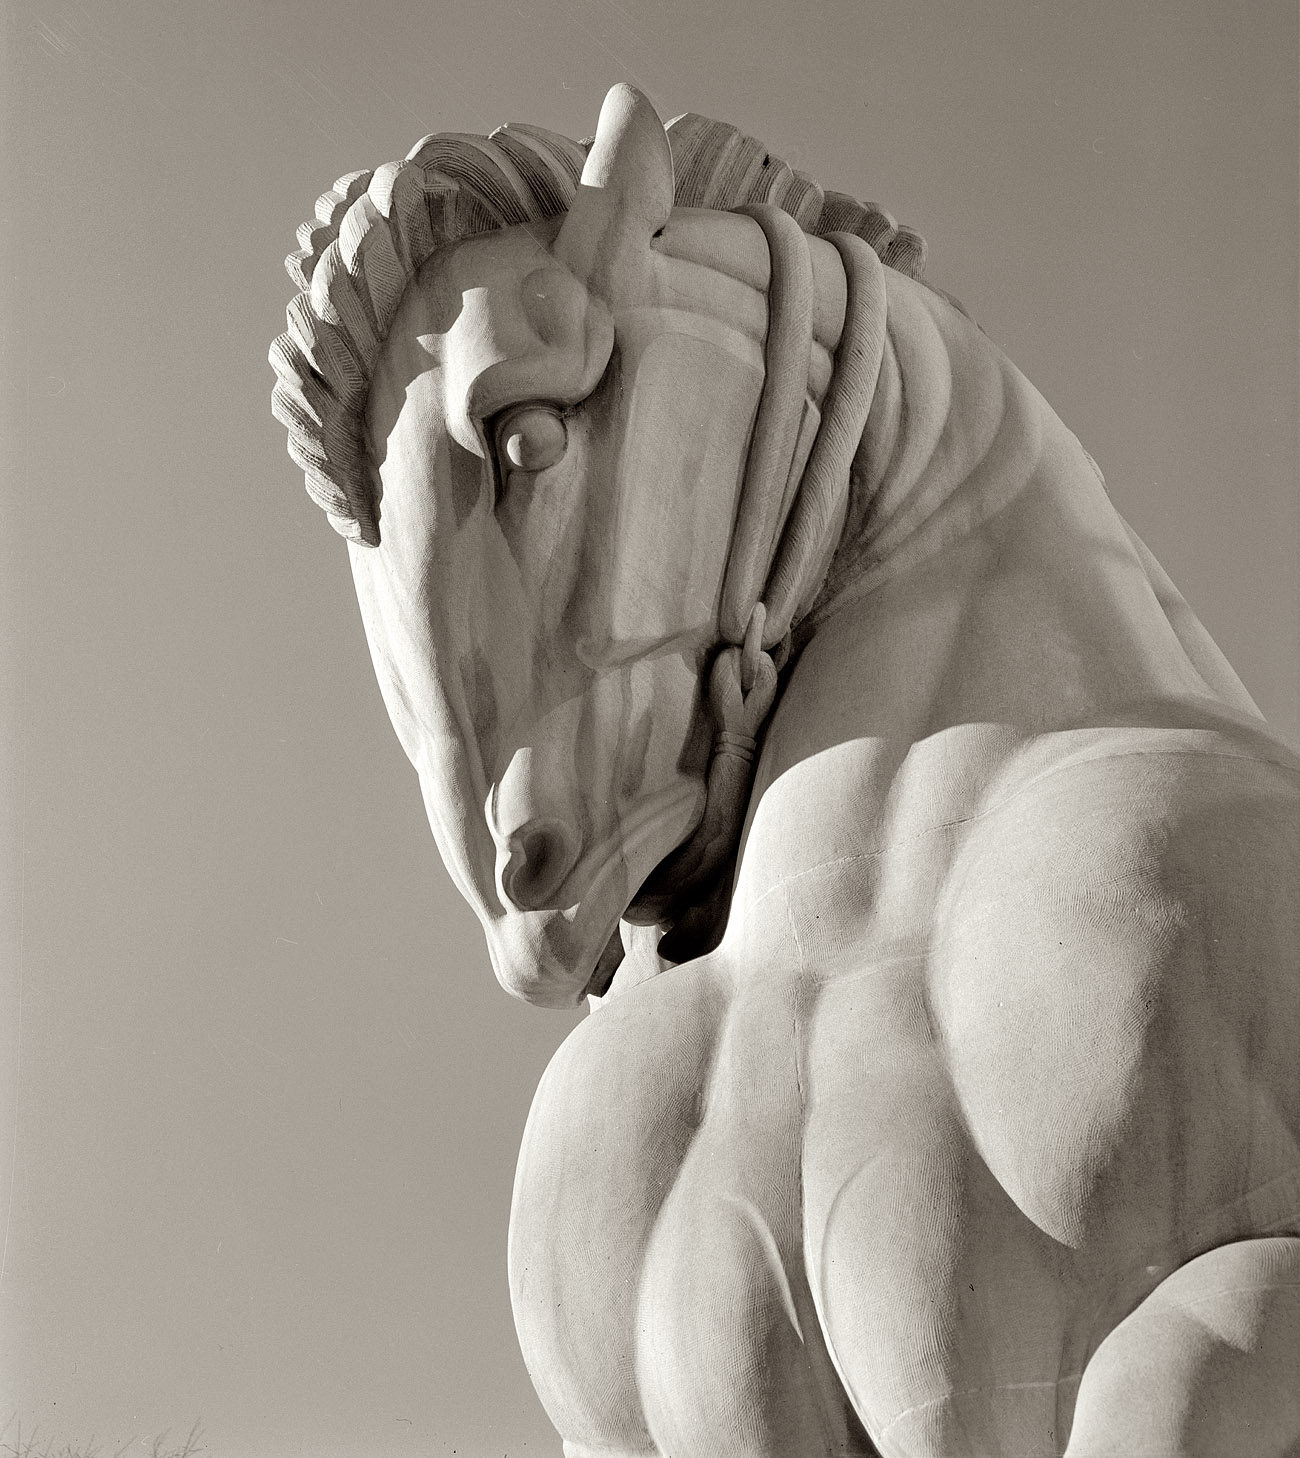 December 1943. Detail of "Man Controlling Trade," a limestone statue completed in 1942 by Michael Lantz for the Federal Trade Commission building in Washington. View full size. Medium-format negative by Esther Bubley.